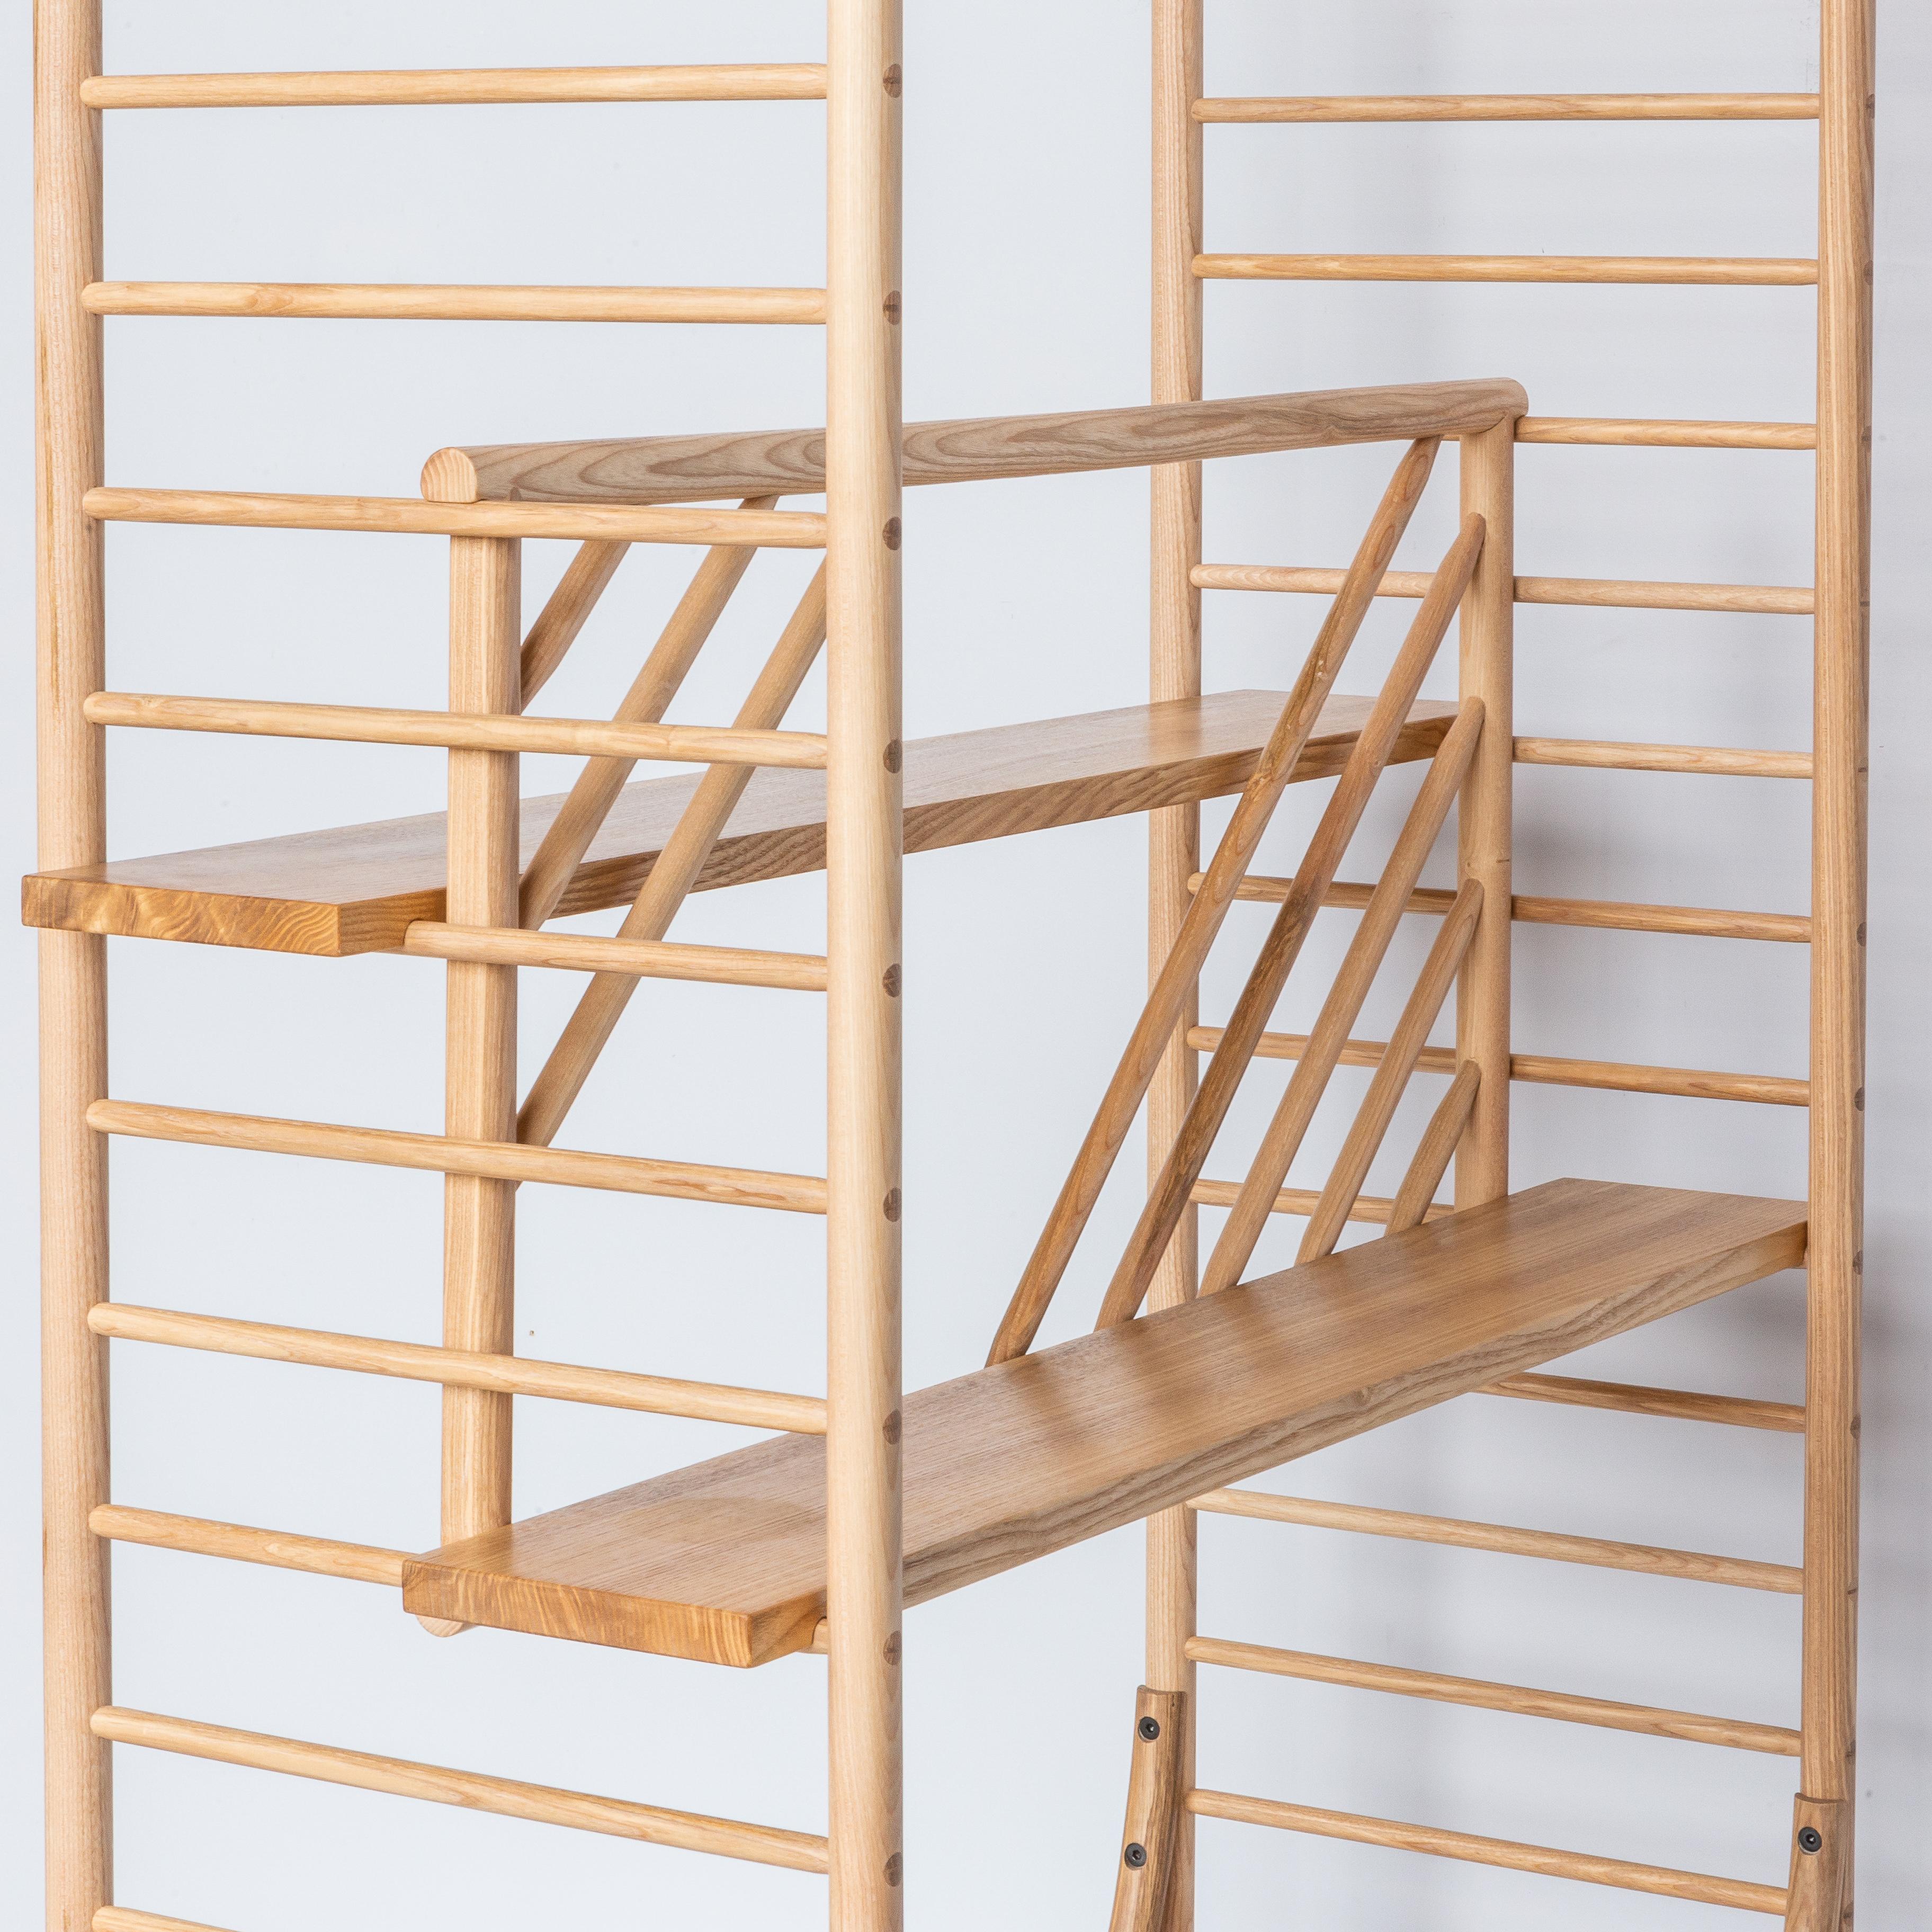 Hand-Crafted Trellis Shelving Single Unit For Sale